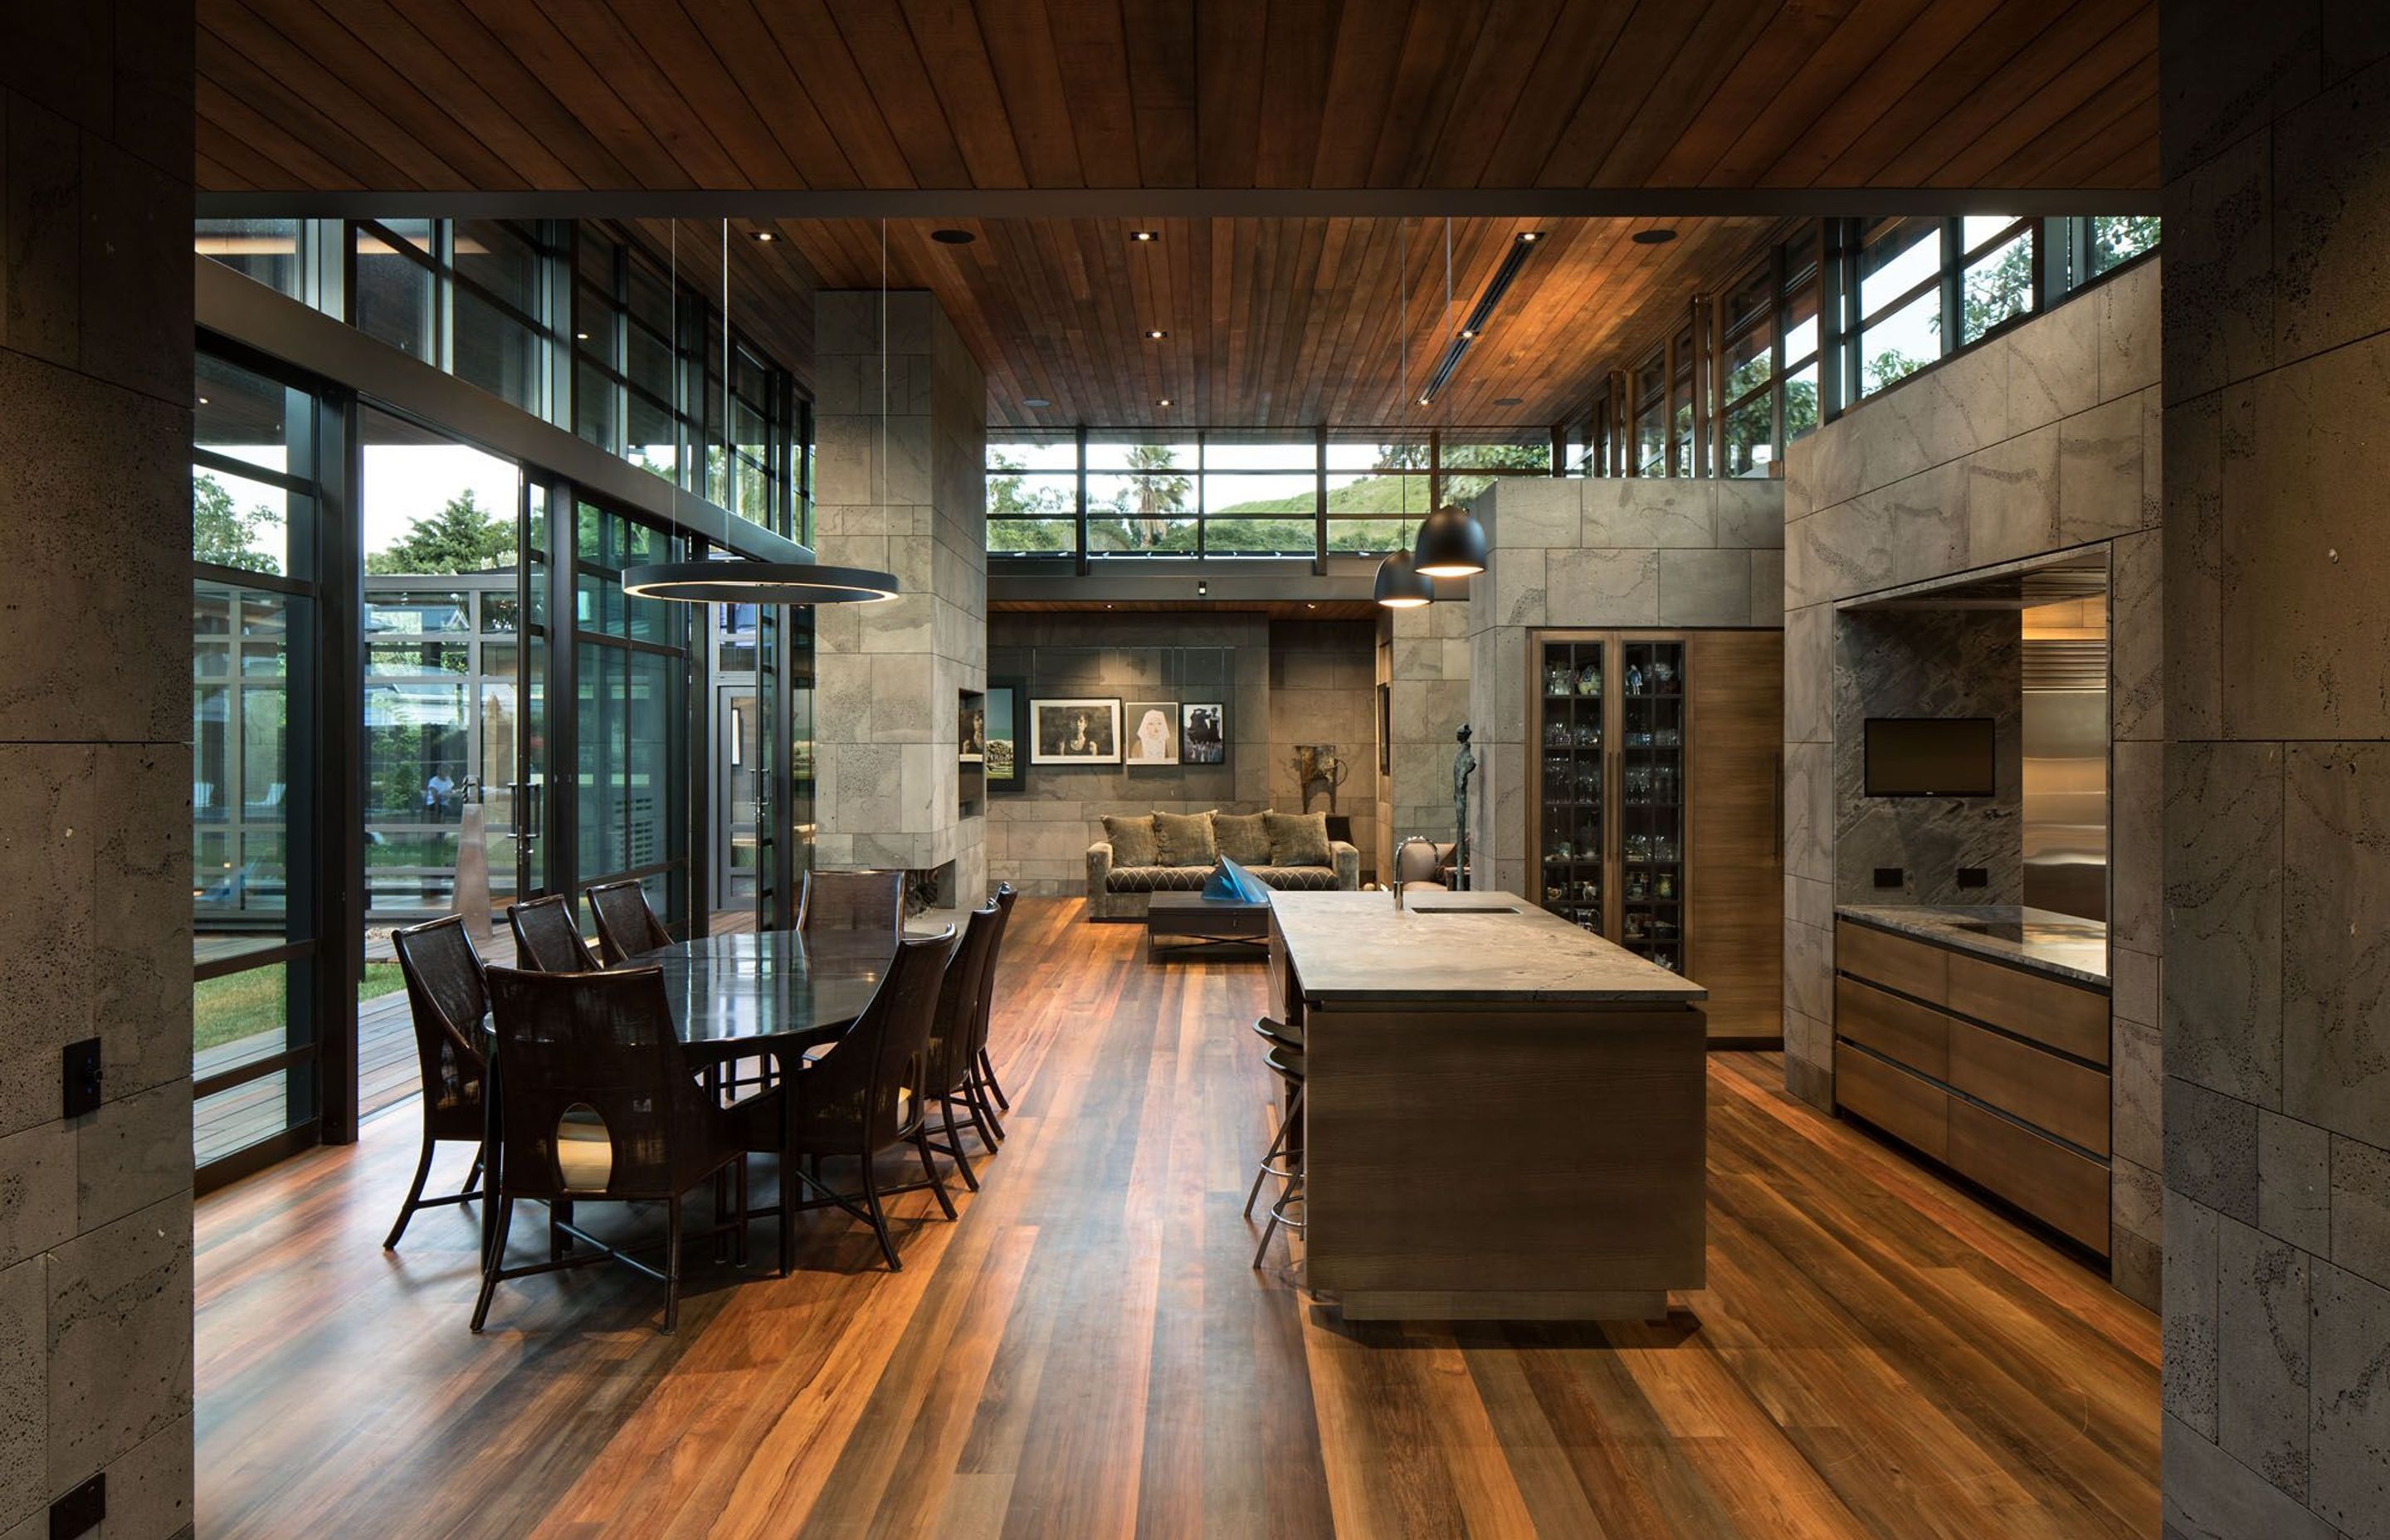 The dining and kitchen areas. Totara riverwood lines the ceilings throughout the main living spaces and rimu riverwood creates a stunning varied pattern on the floor.